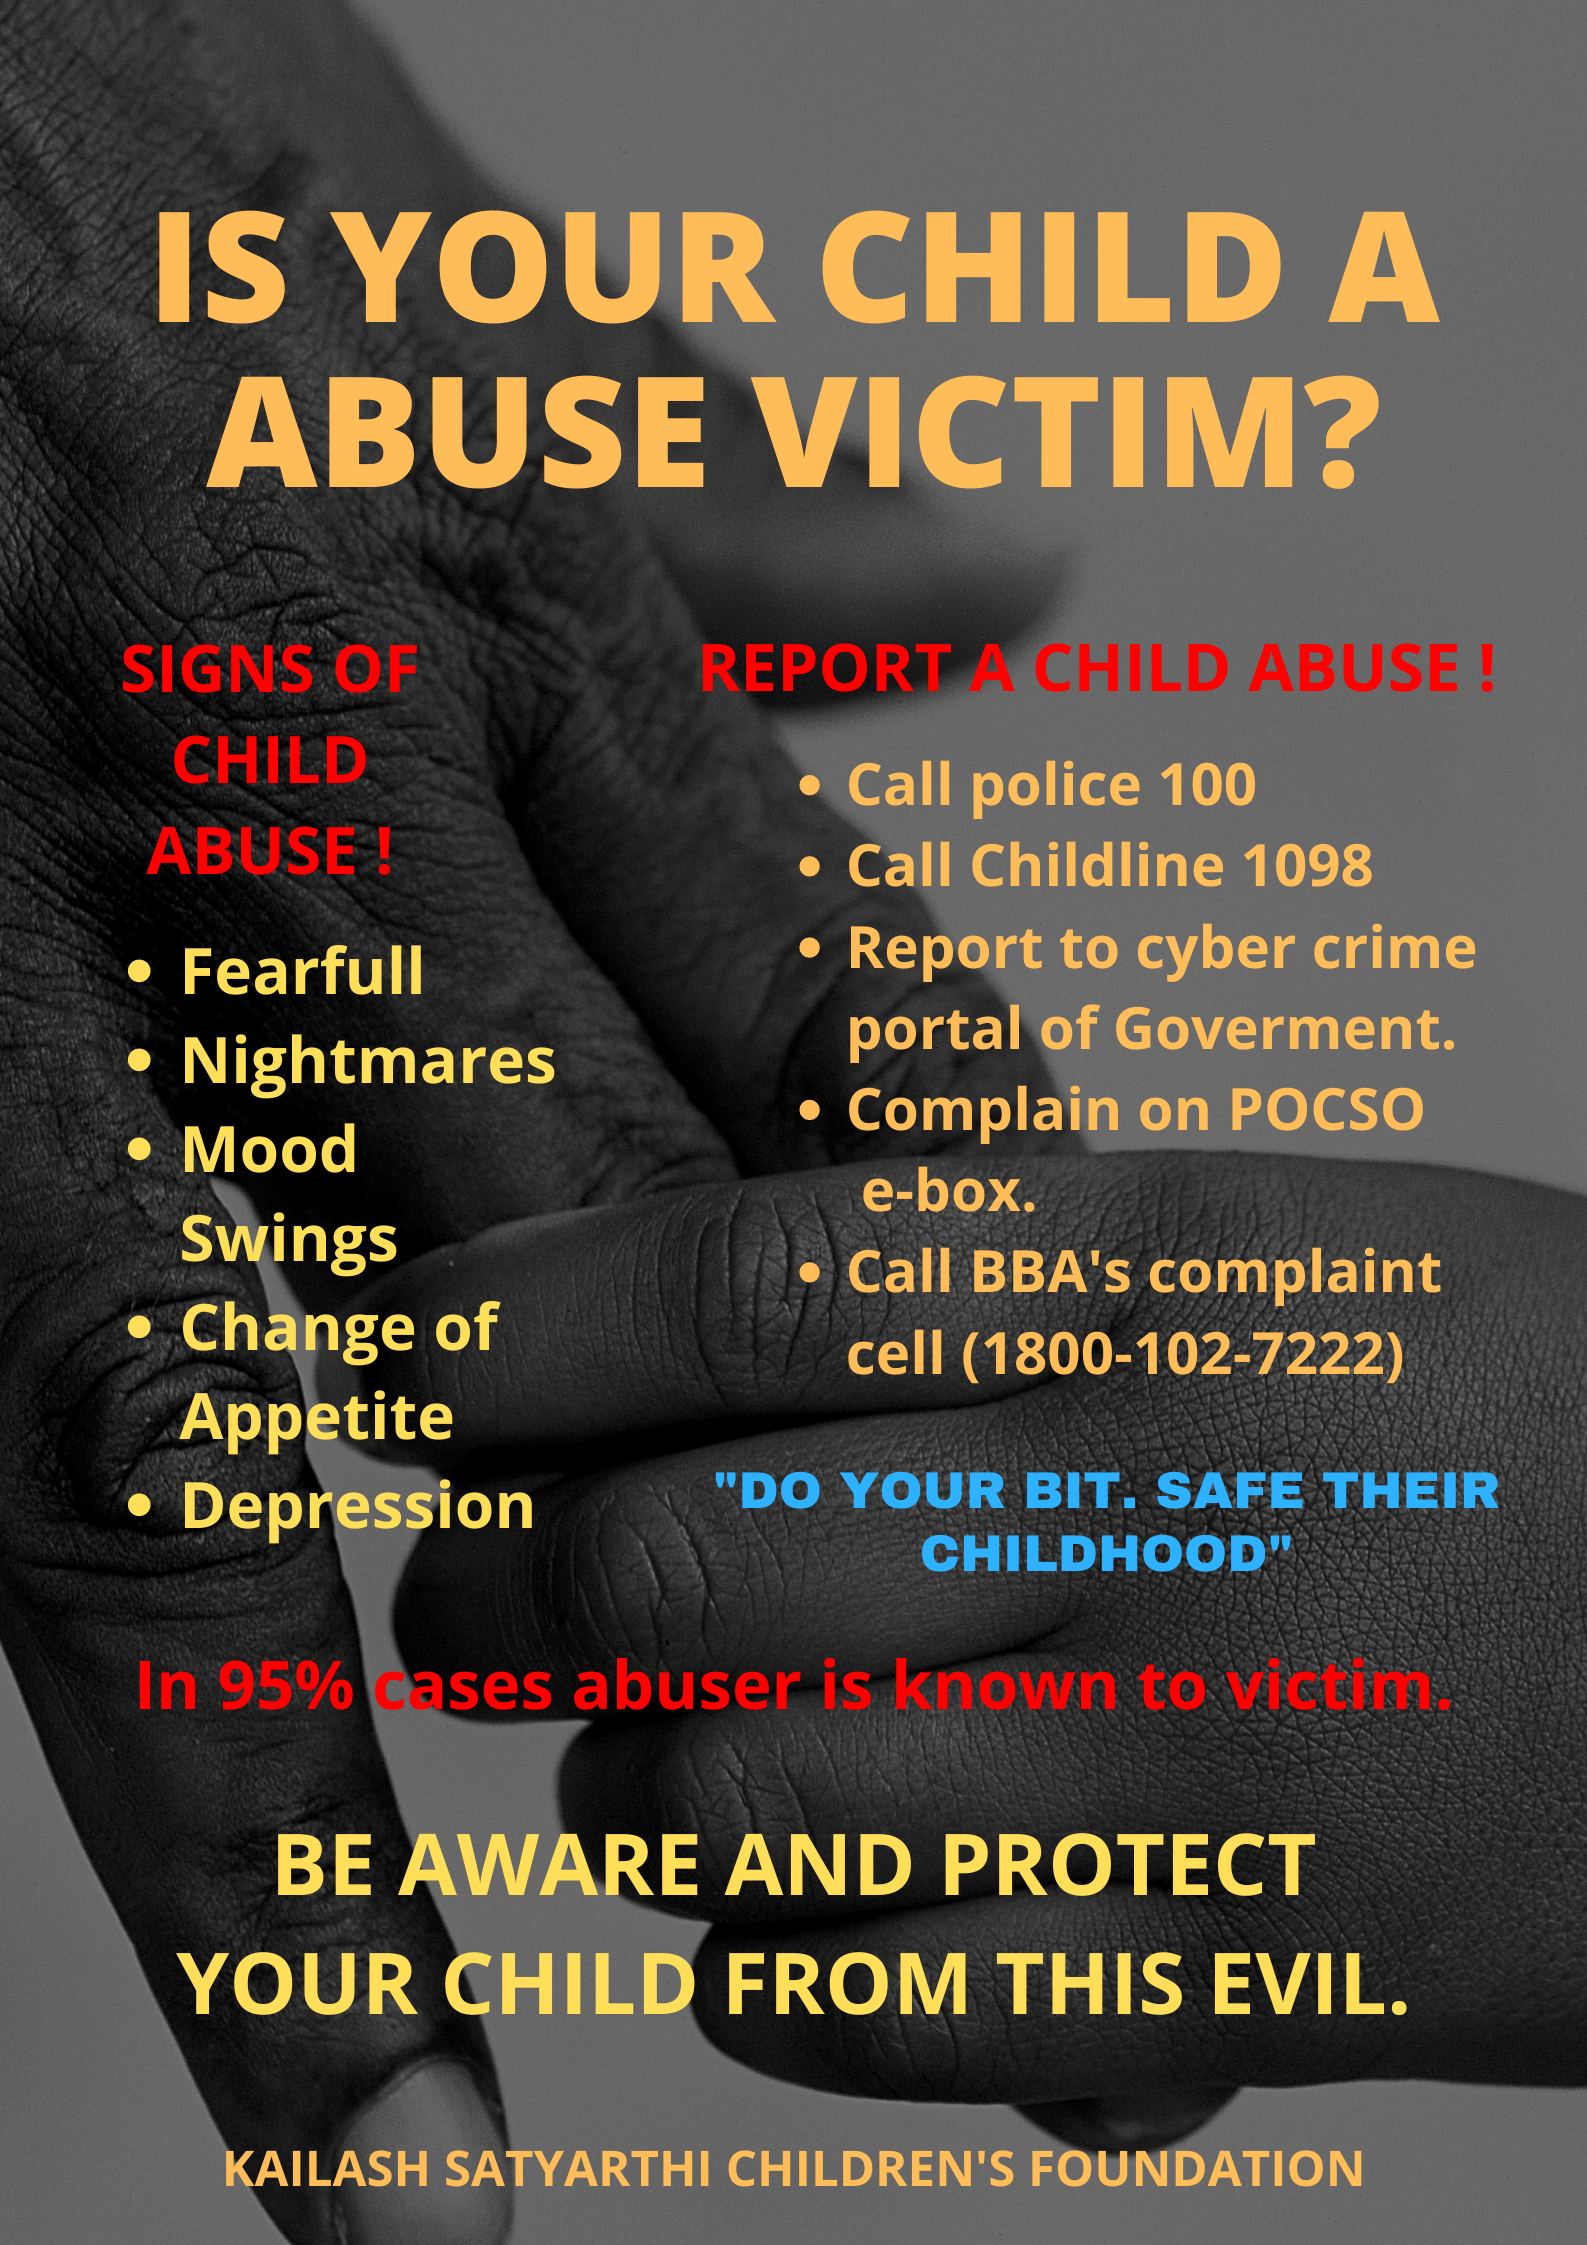 IS-YOUR-CHILD-A-ABUSED-VICTIM_